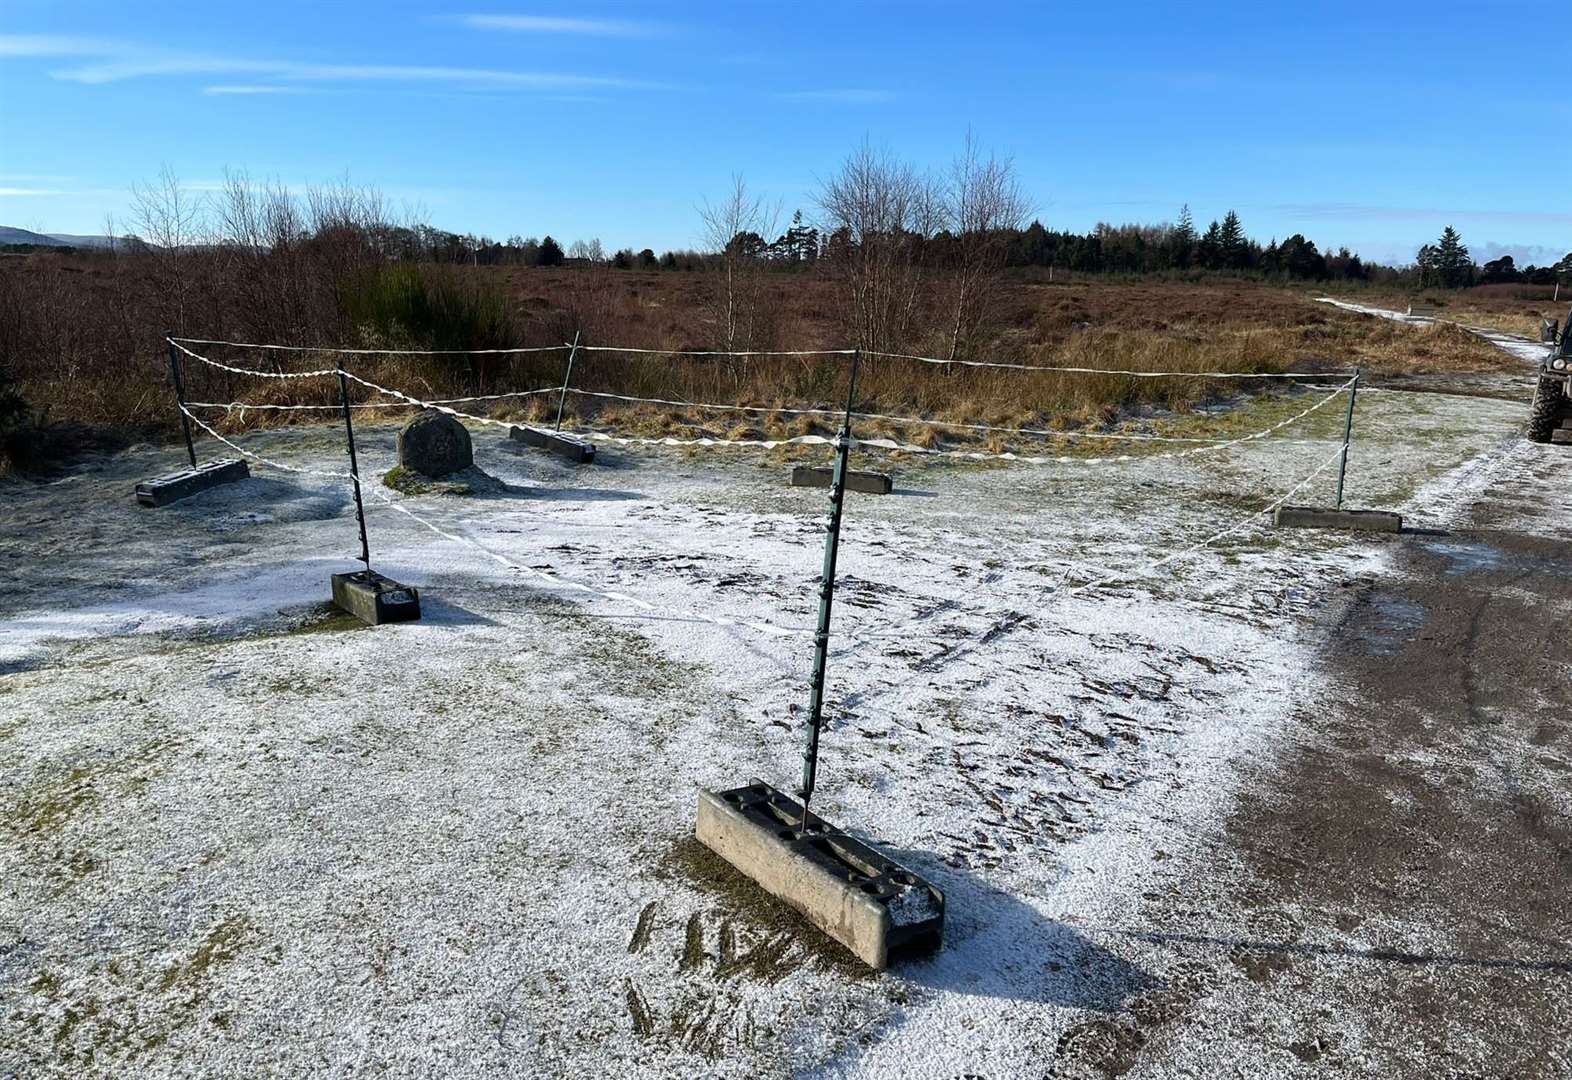 The Fraser Stone at Culloden Battlefield has been cordoned off after heavy volumes of visitors damaged the surrounding ground.